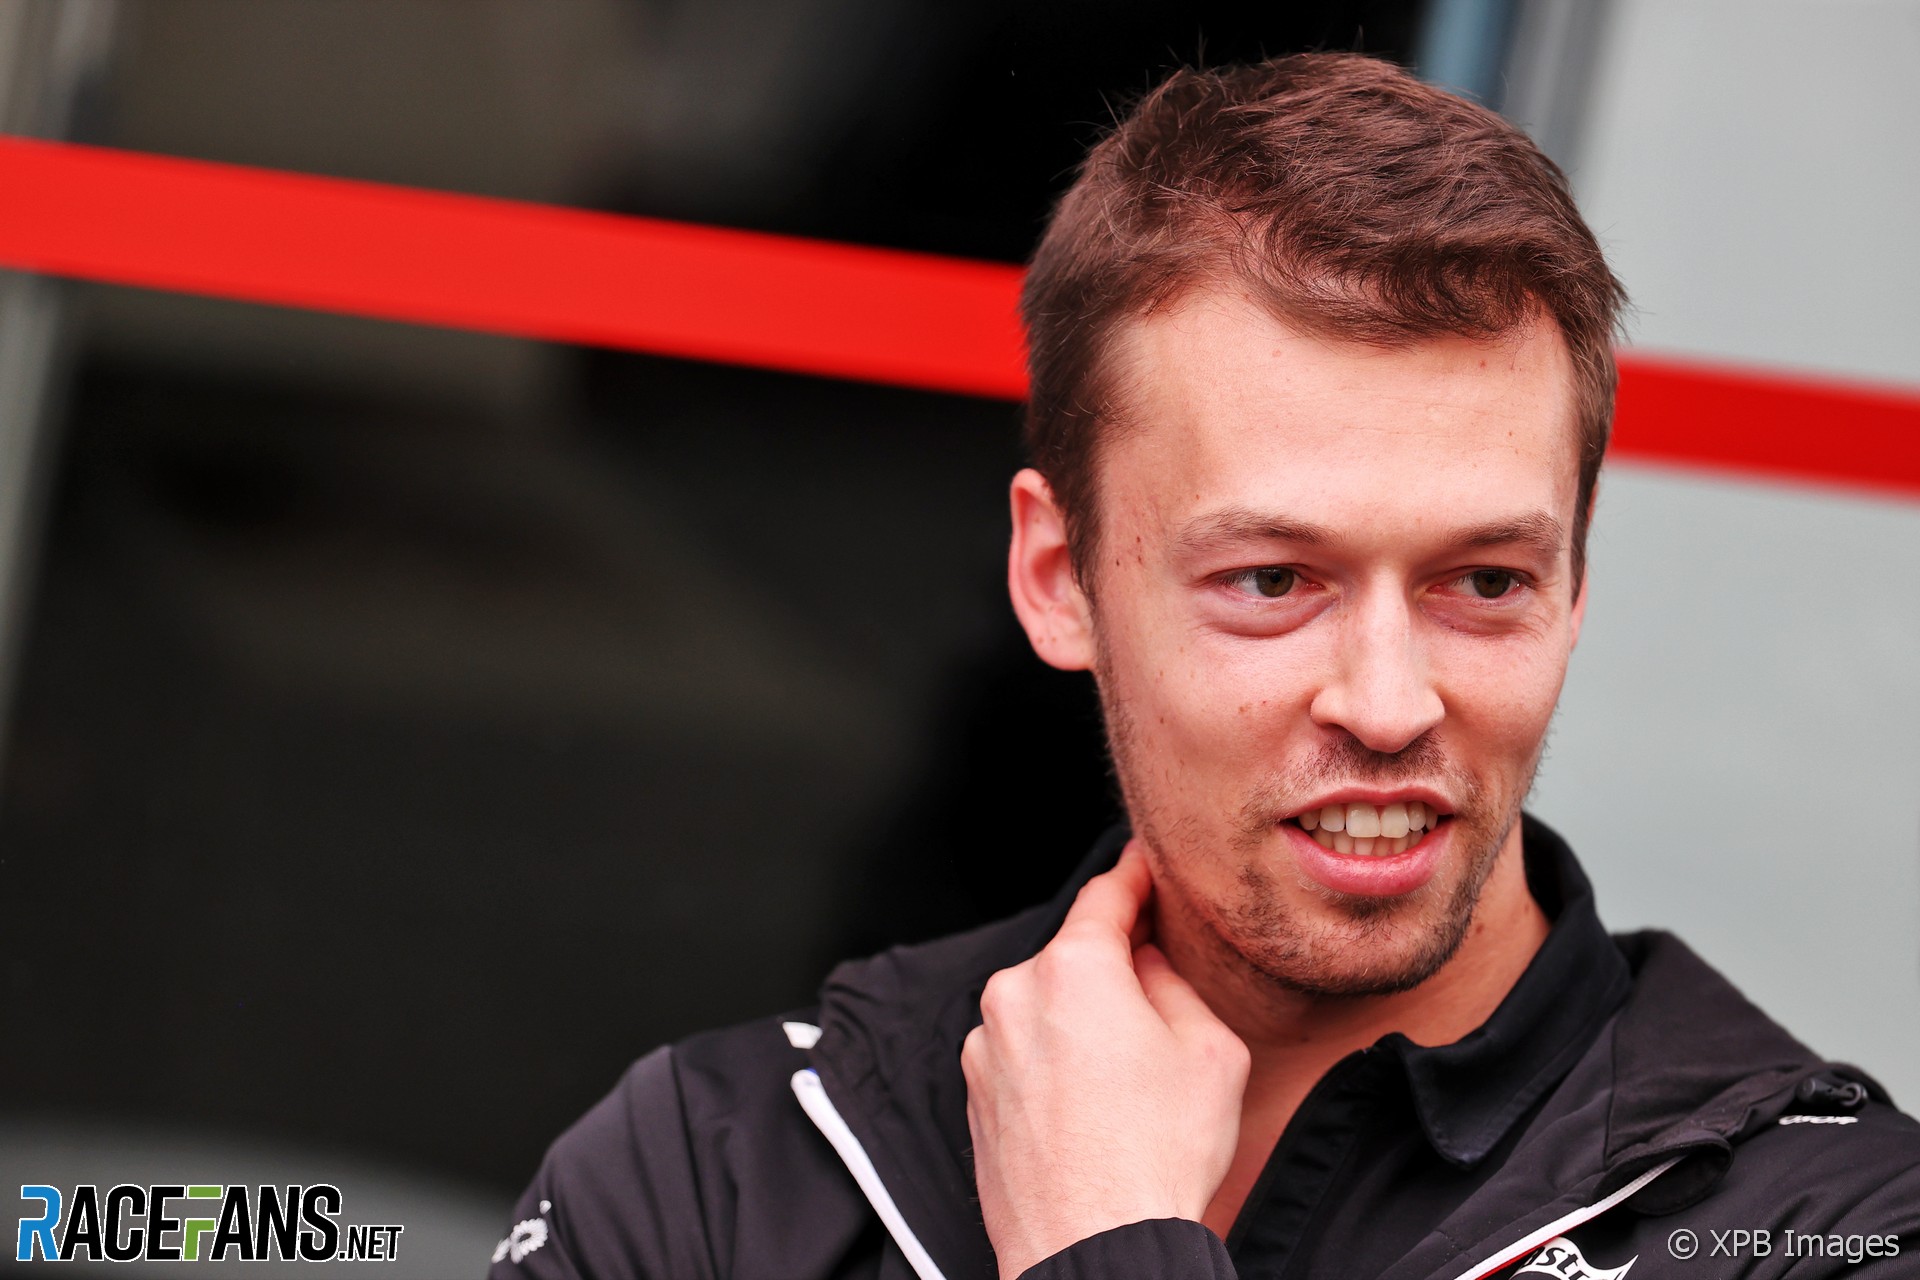 “Unfair” to bar Russian competitors from sports over war in Ukraine – Kvyat | 2022 F1 season